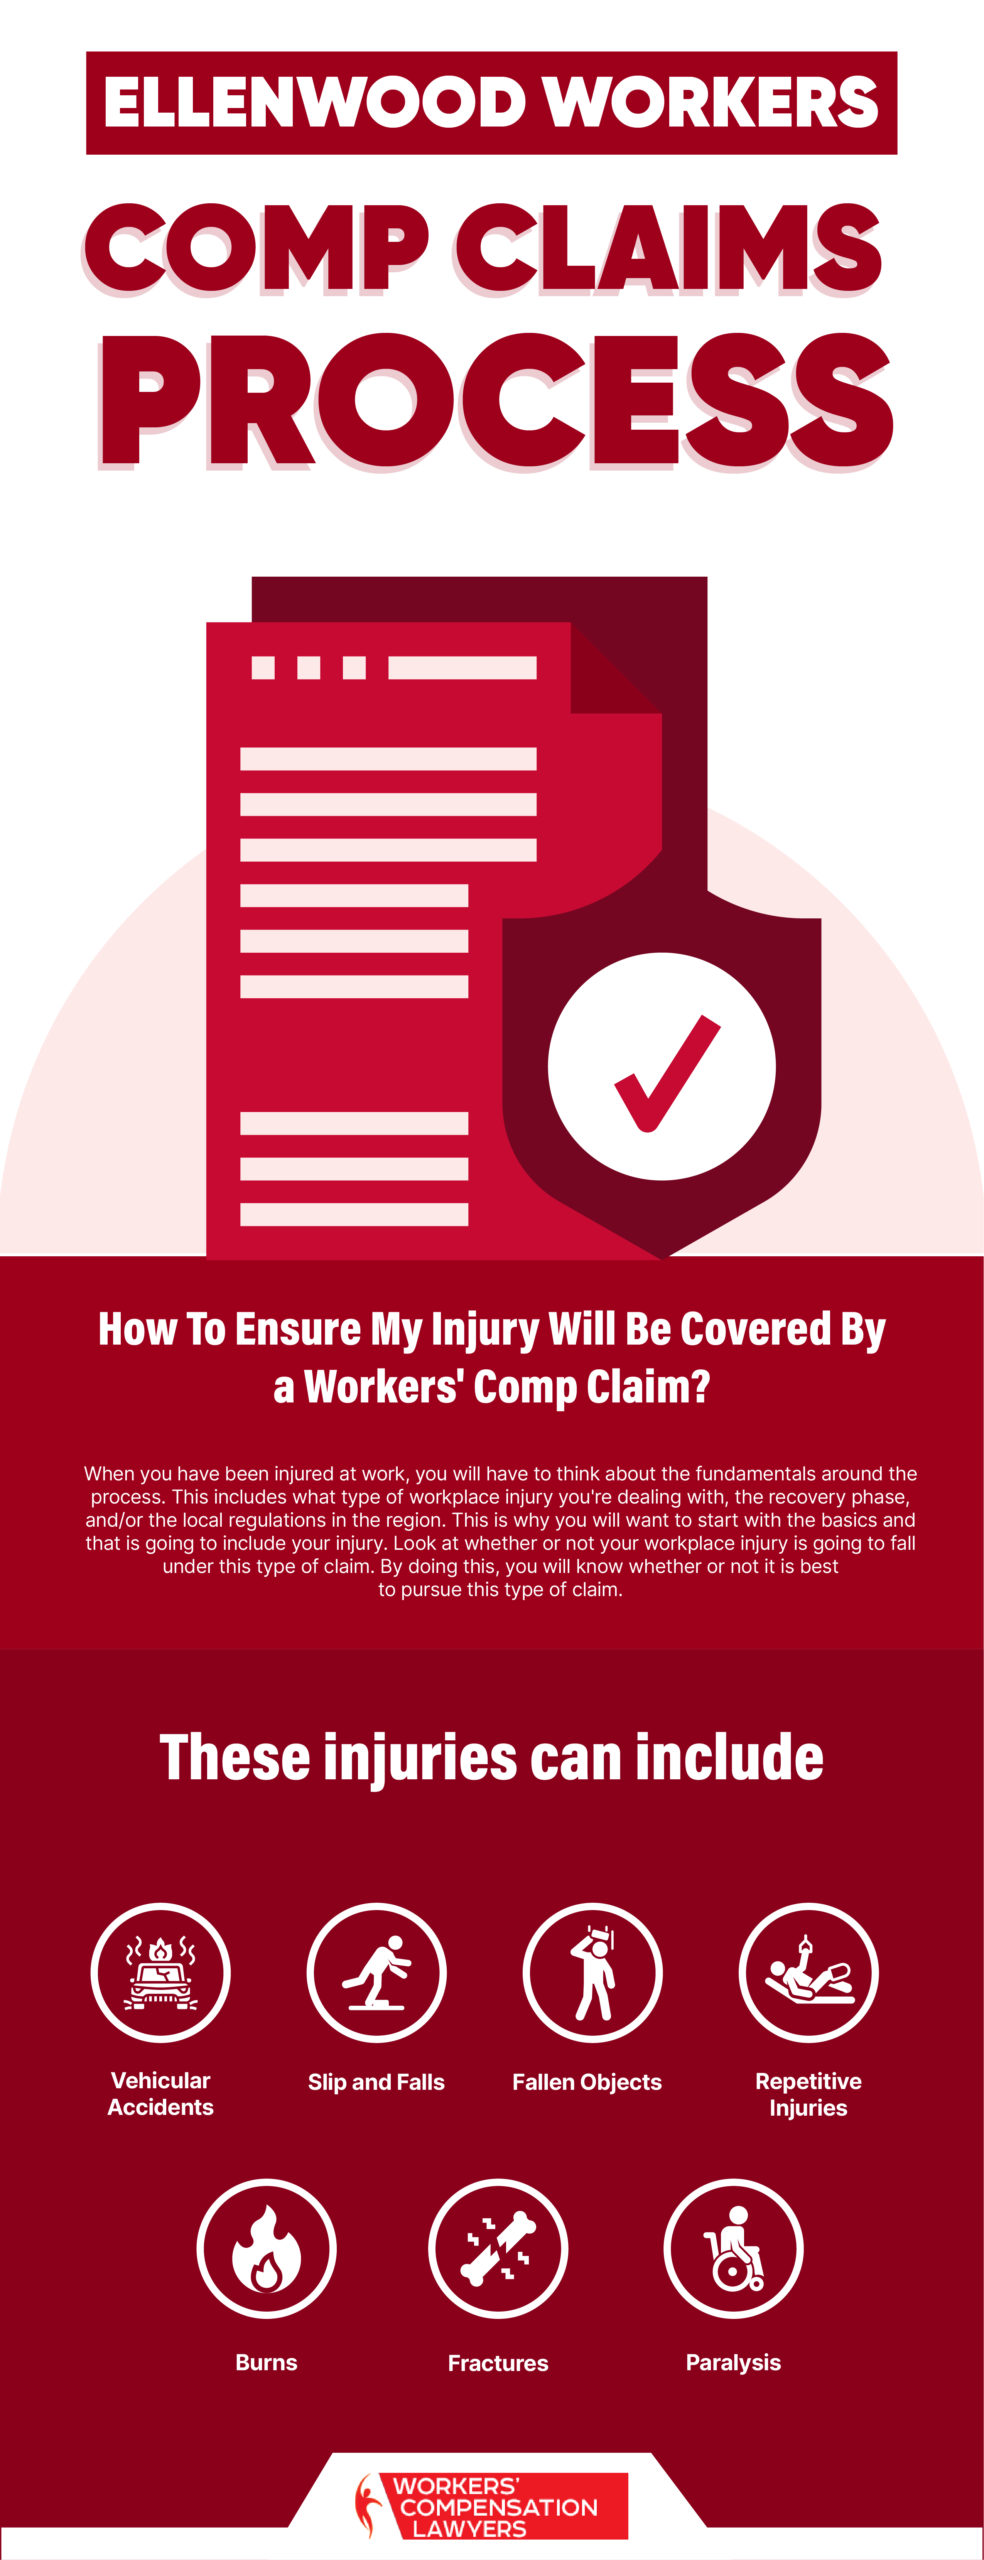 Ellenwood Workers Compensation Claims Process Infographic